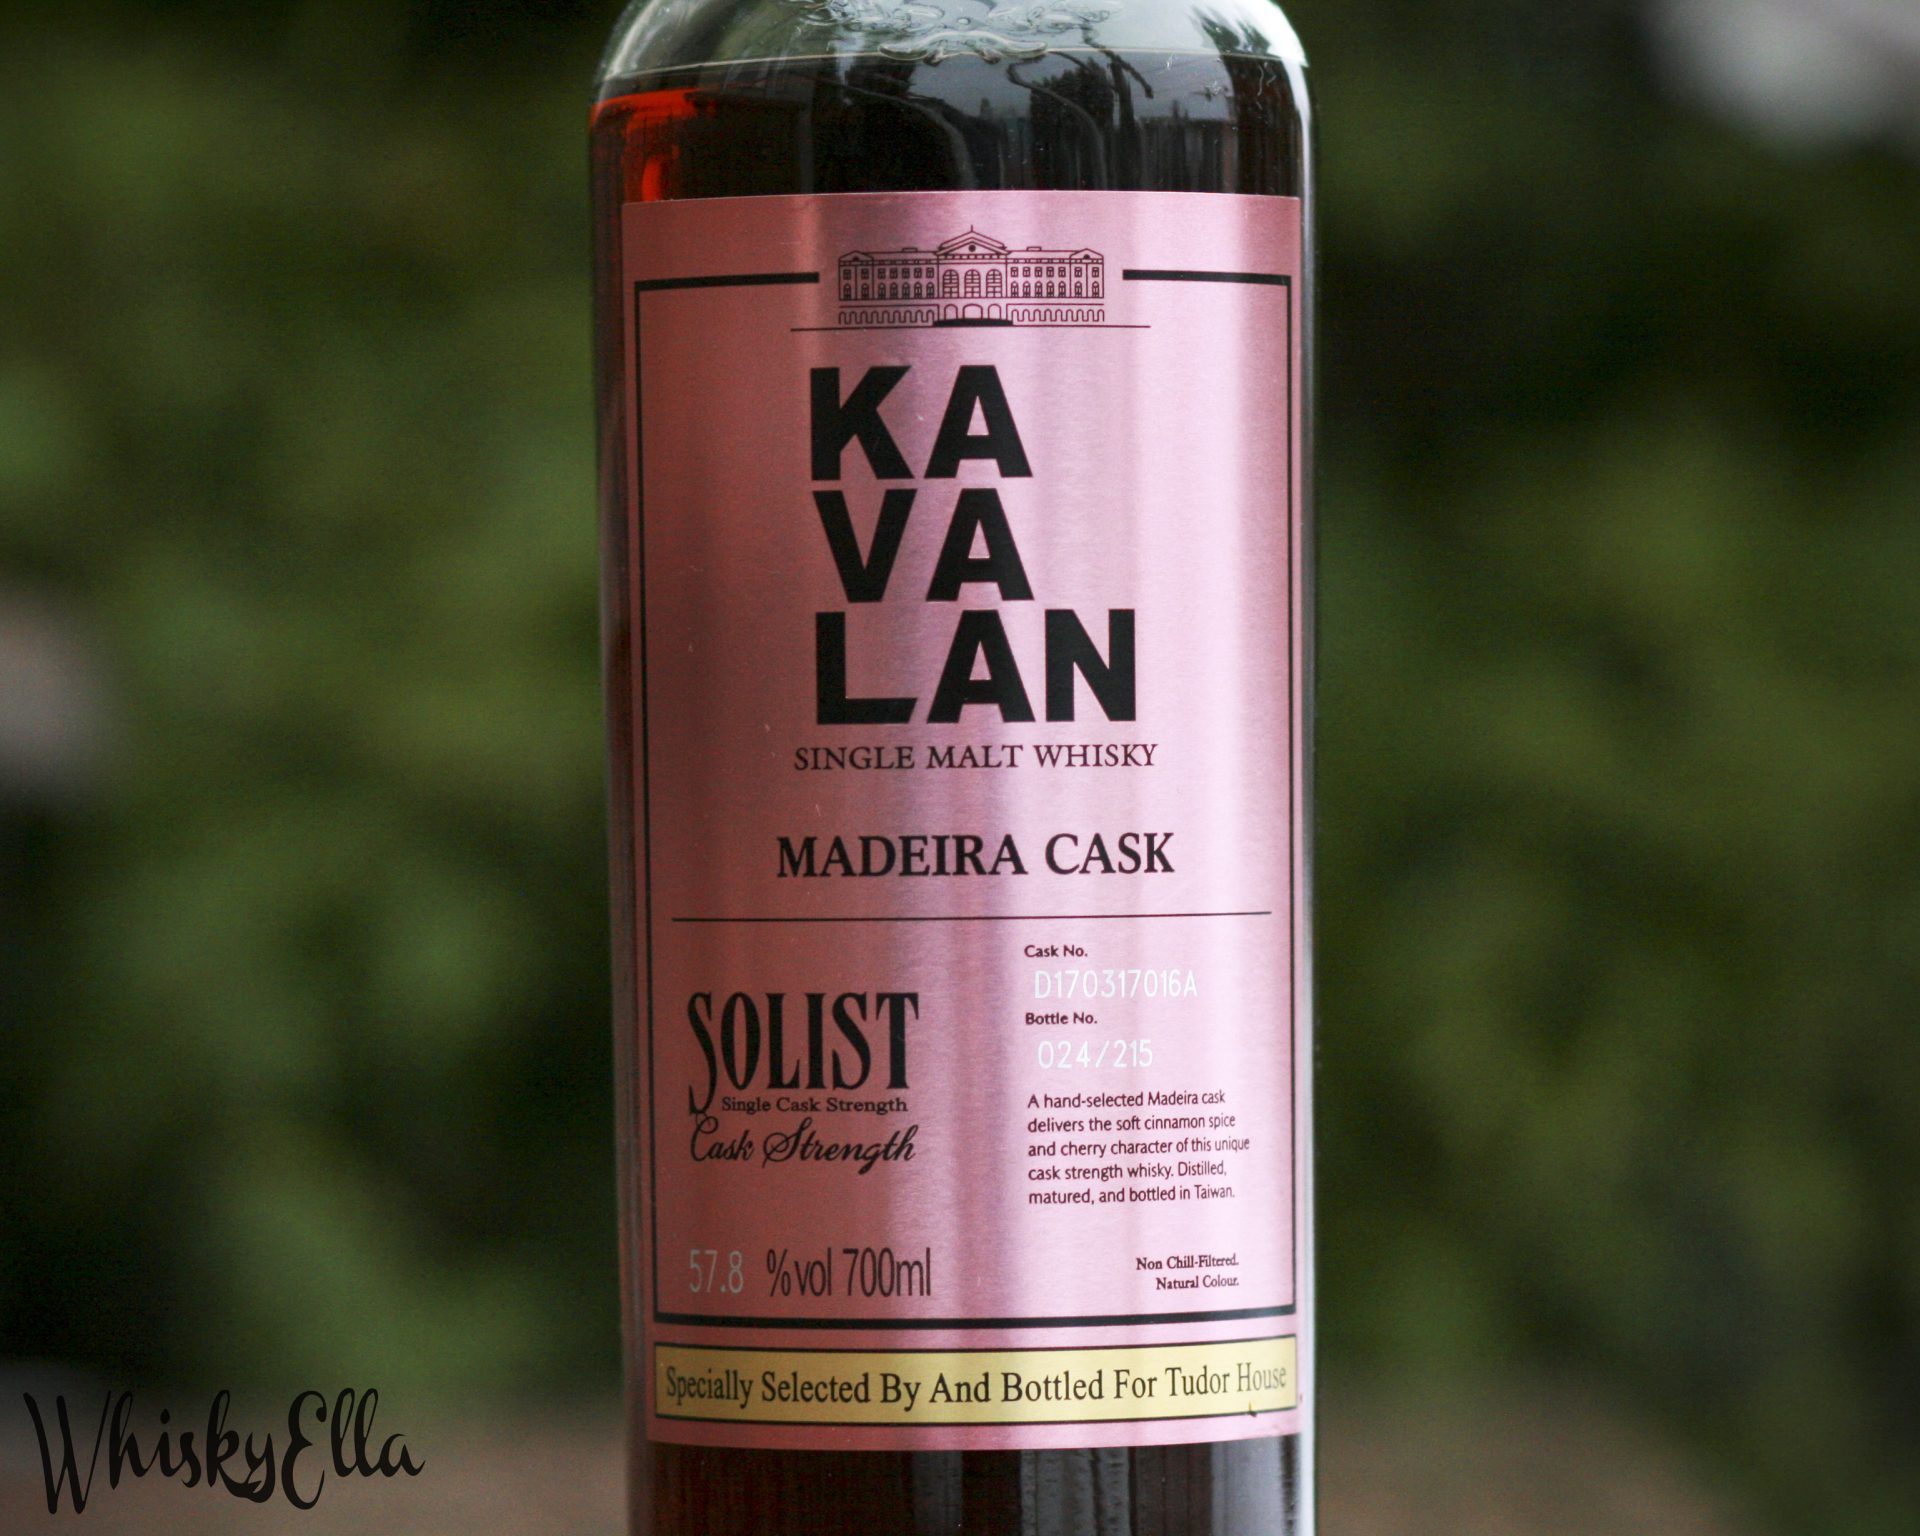 Nasza recenzja Kavalan Solist Madeira Cask #D170317016A Specially Selected By And Bottled For Tudor House #216